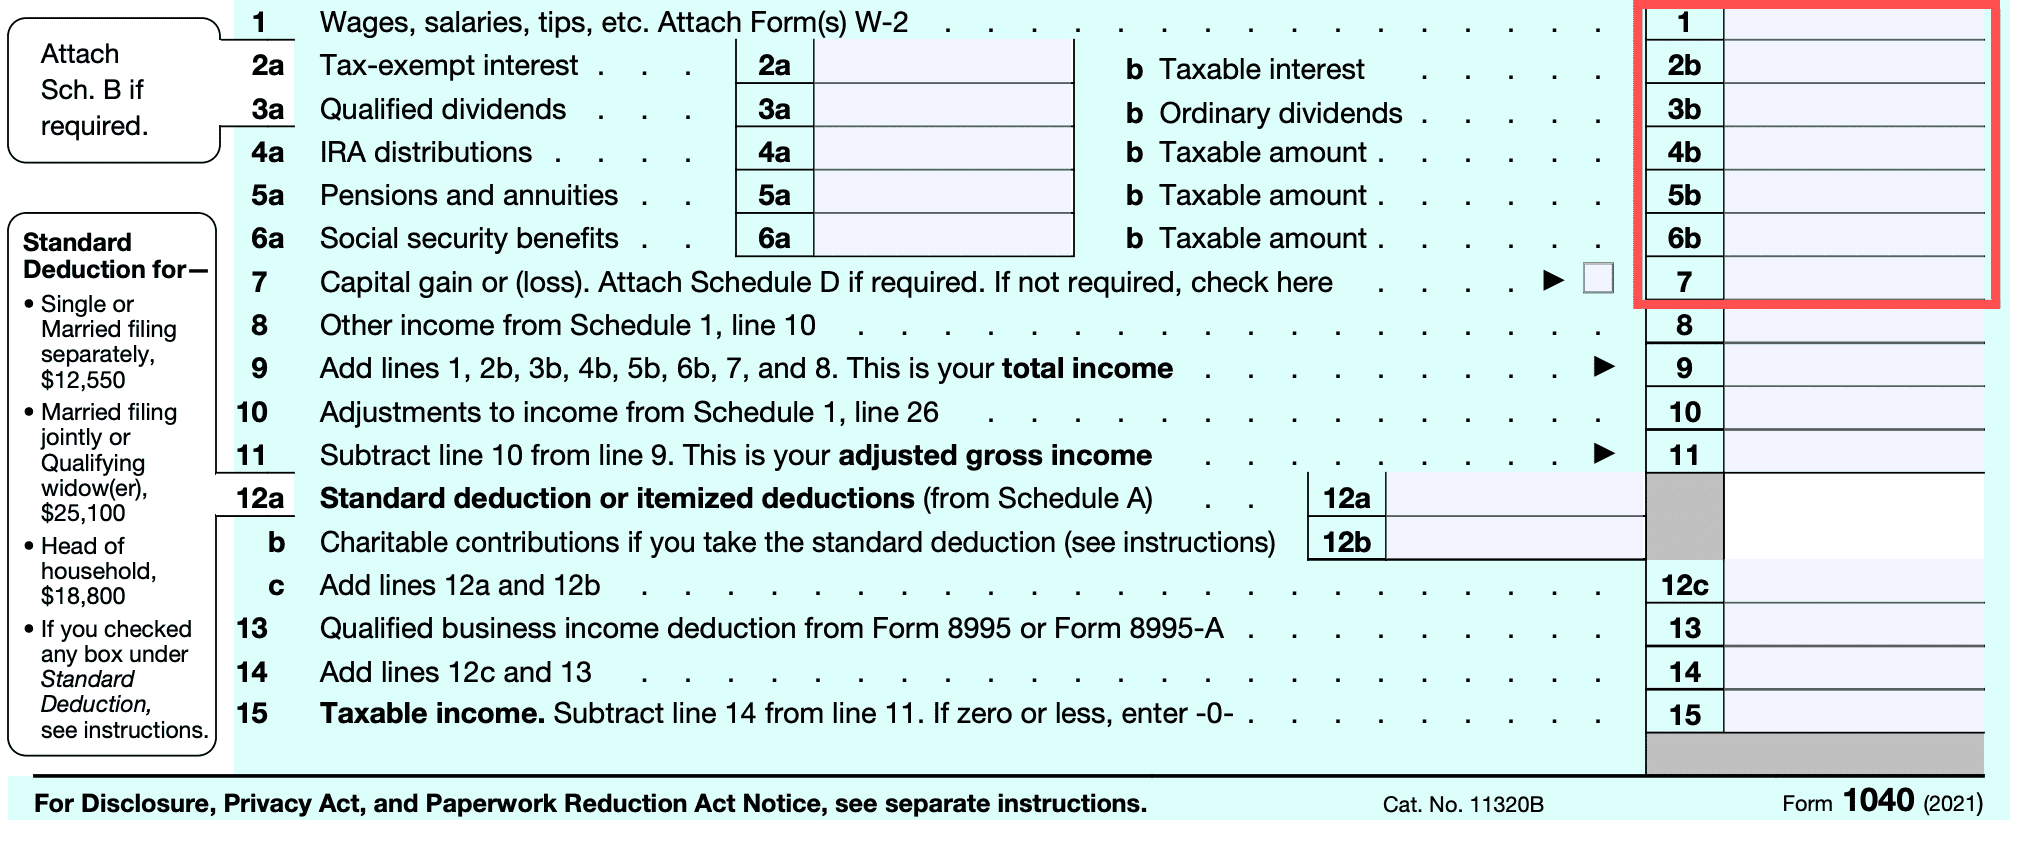 Reporting your income on IRS Form 1040